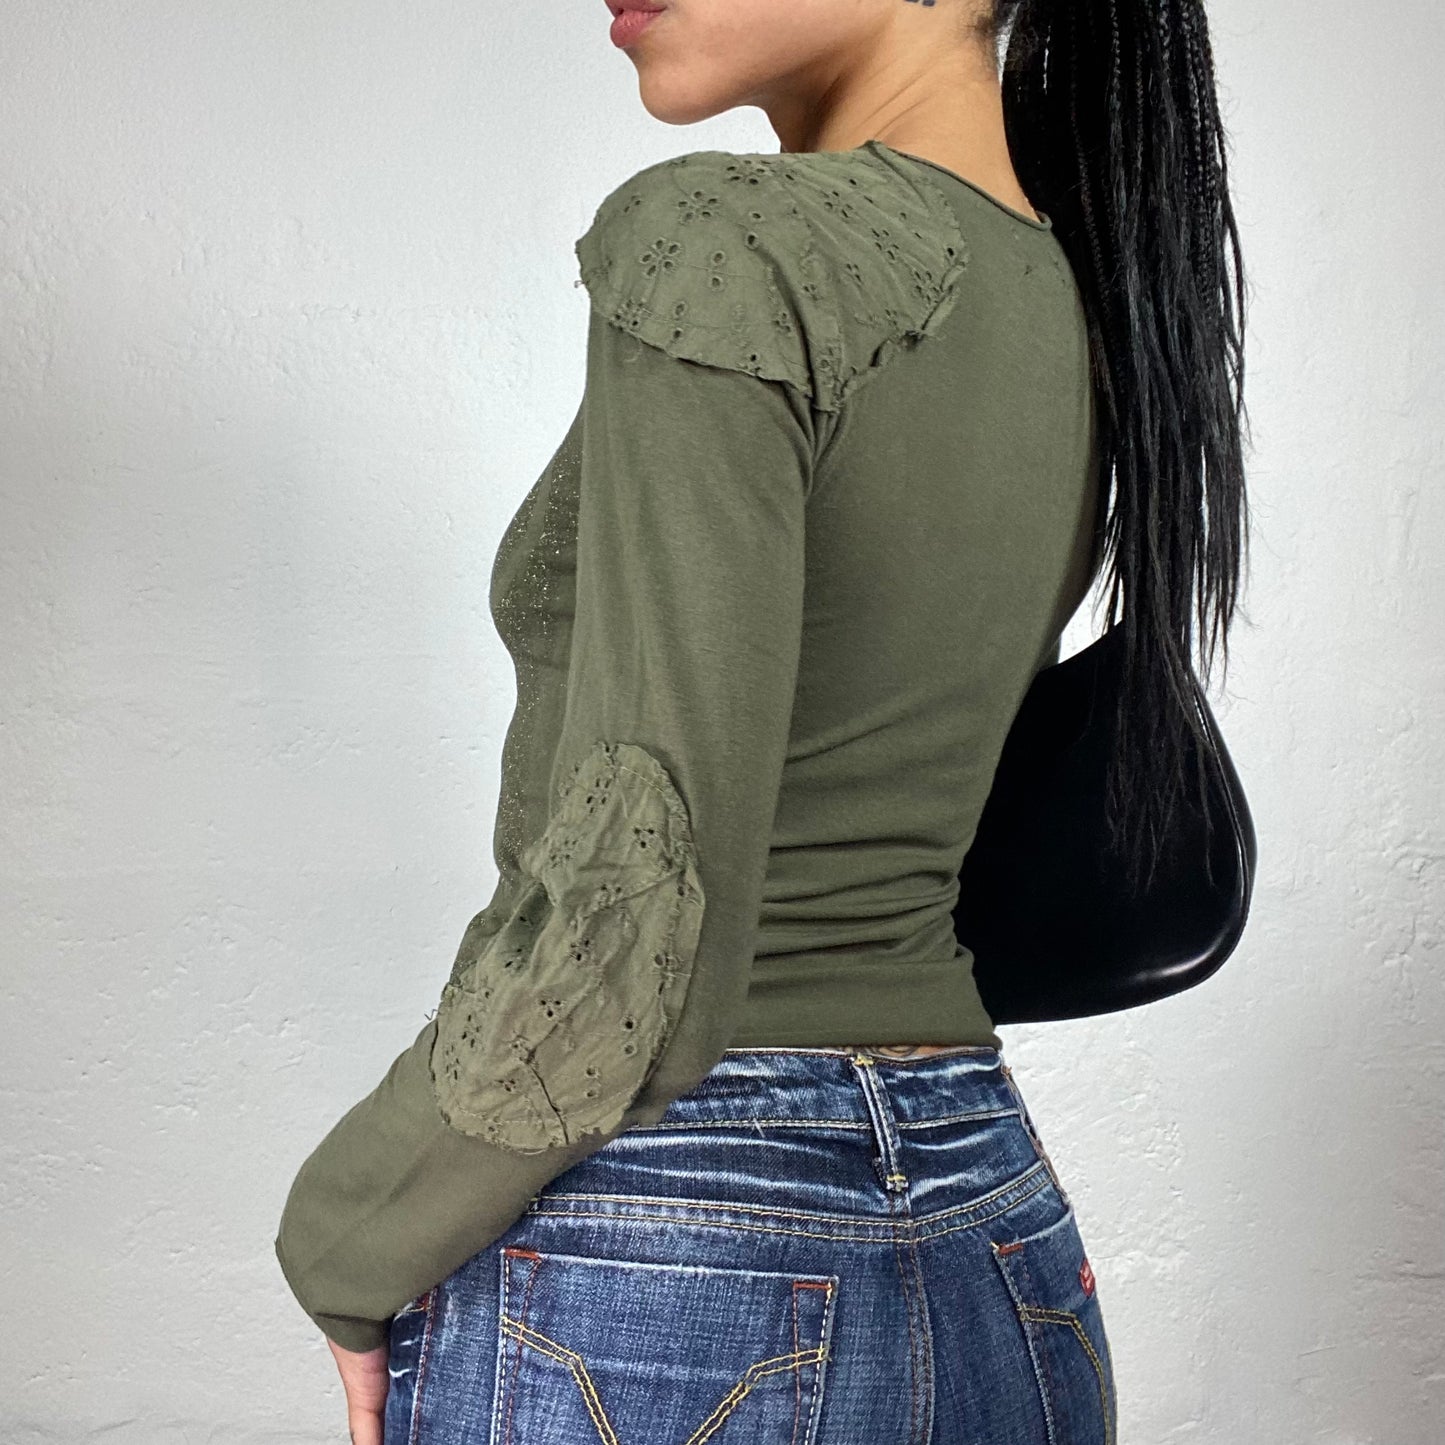 Vintage 2000's Downtown Girl Khaki Green Longsleeve Top with Patches and Sequin Embroidery (S)